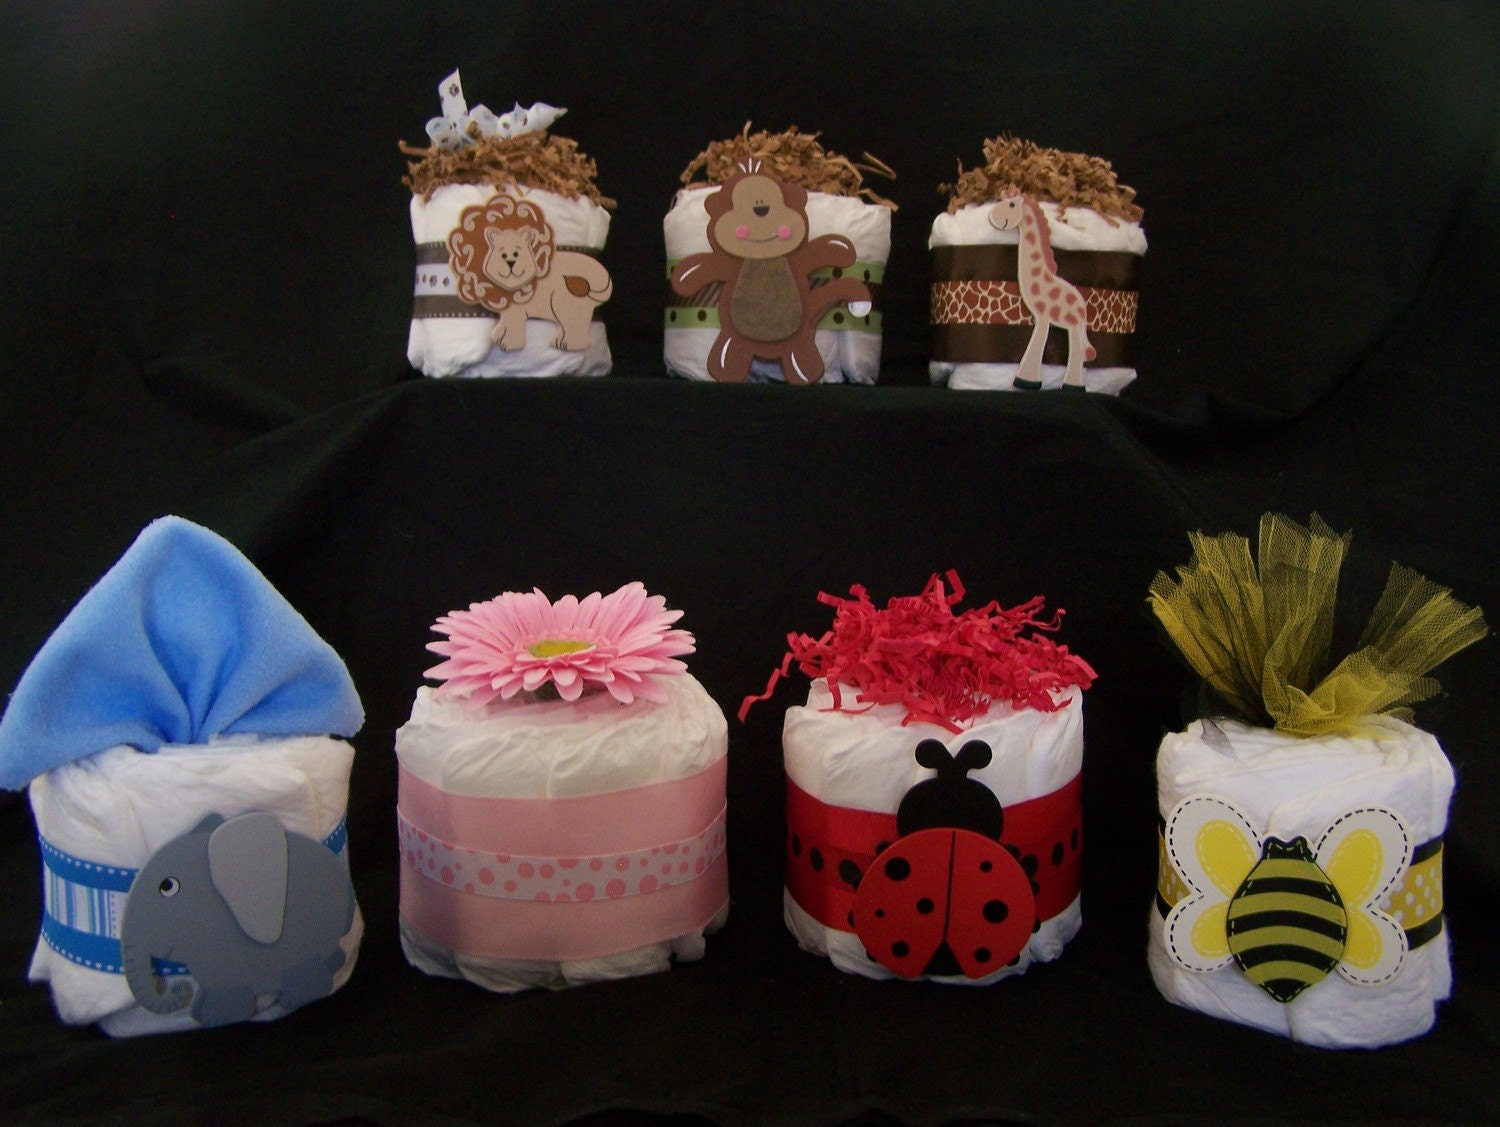 Mini Diaper Cakes Centerpieces Baby Shower ideas Baby Shower gifts Monkey Flower Giraffe Lion Bumble Bee Ladybug